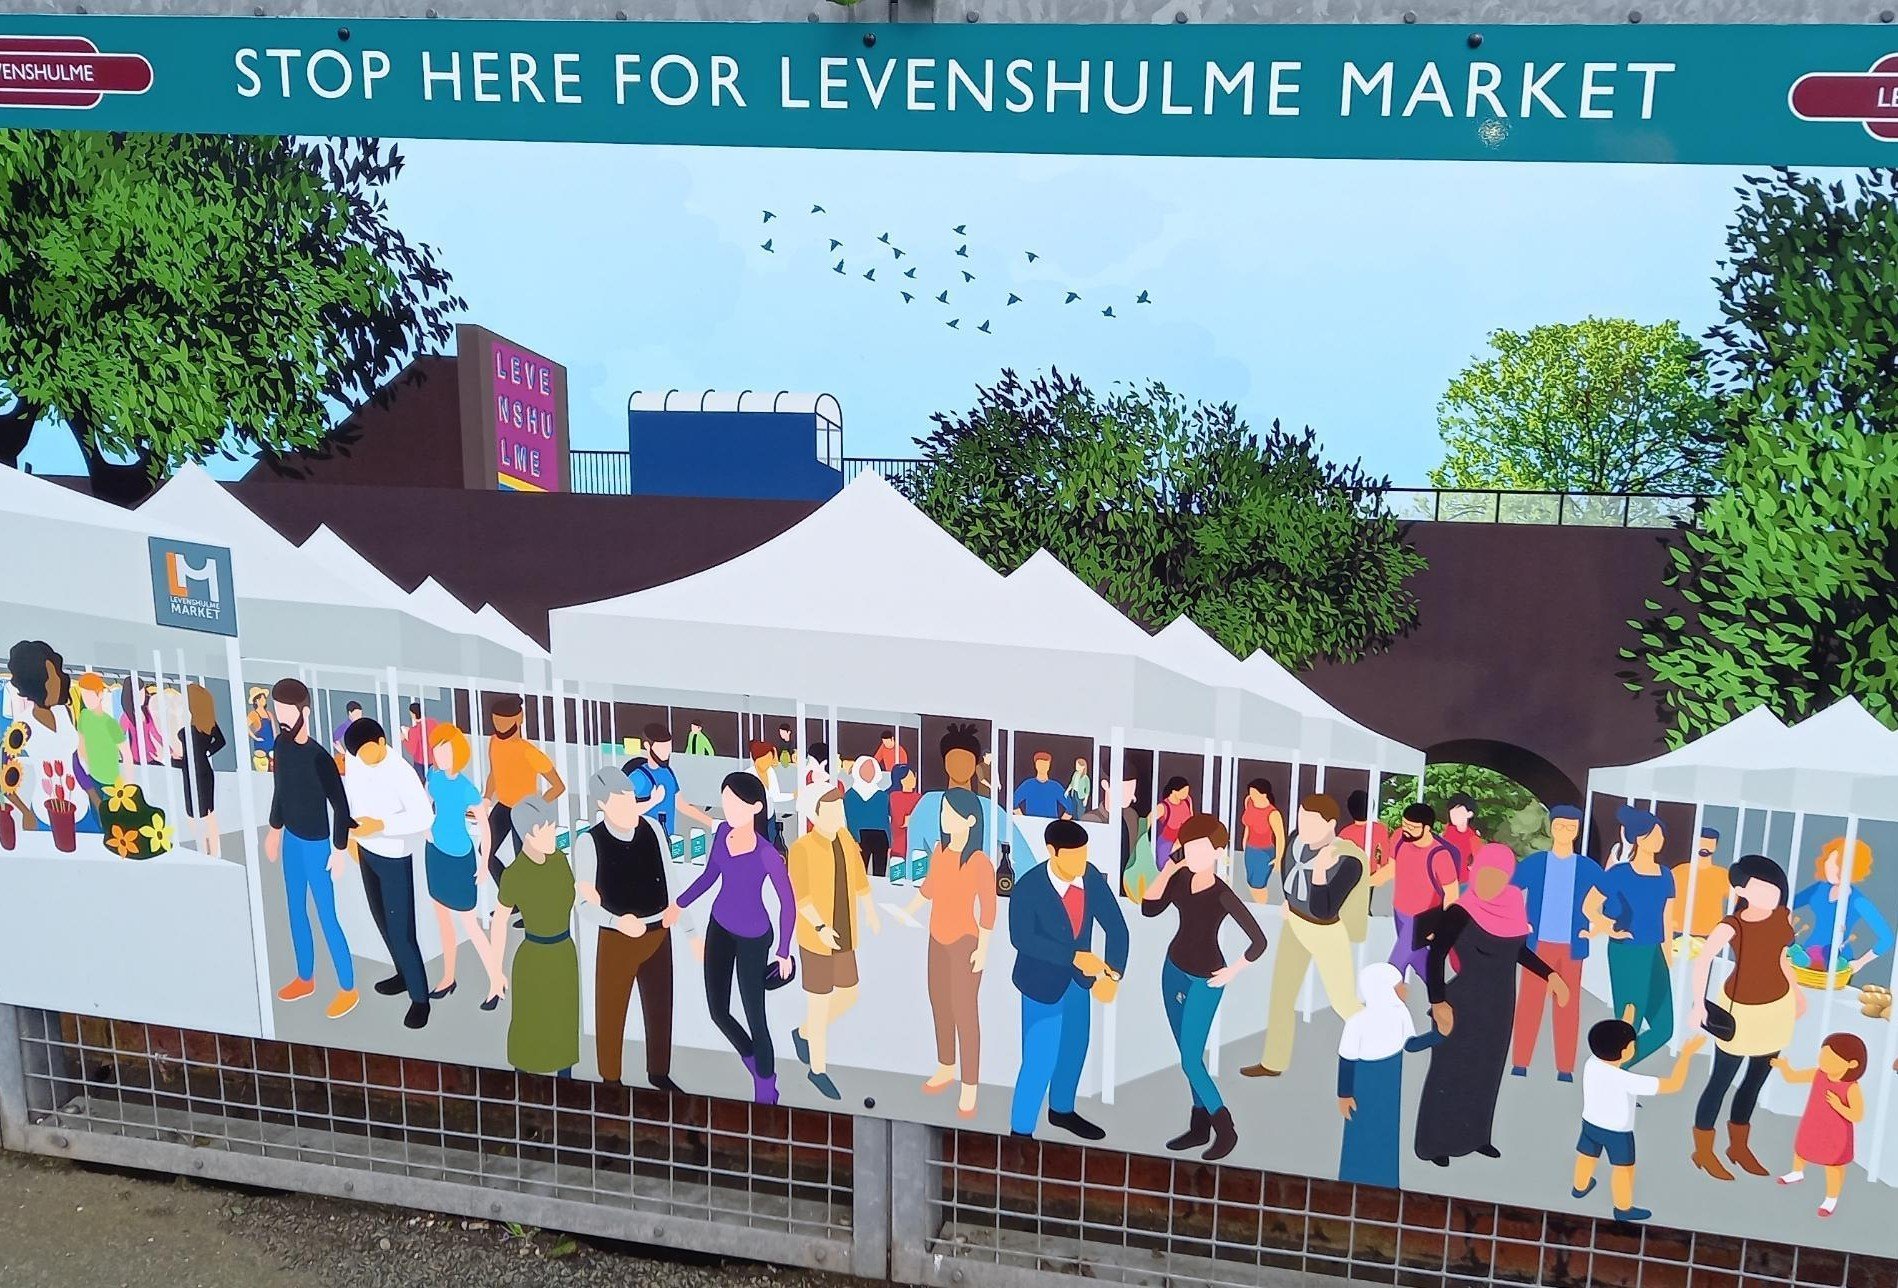 this-image-shows-art-at-levenshulme-depicting-the-market